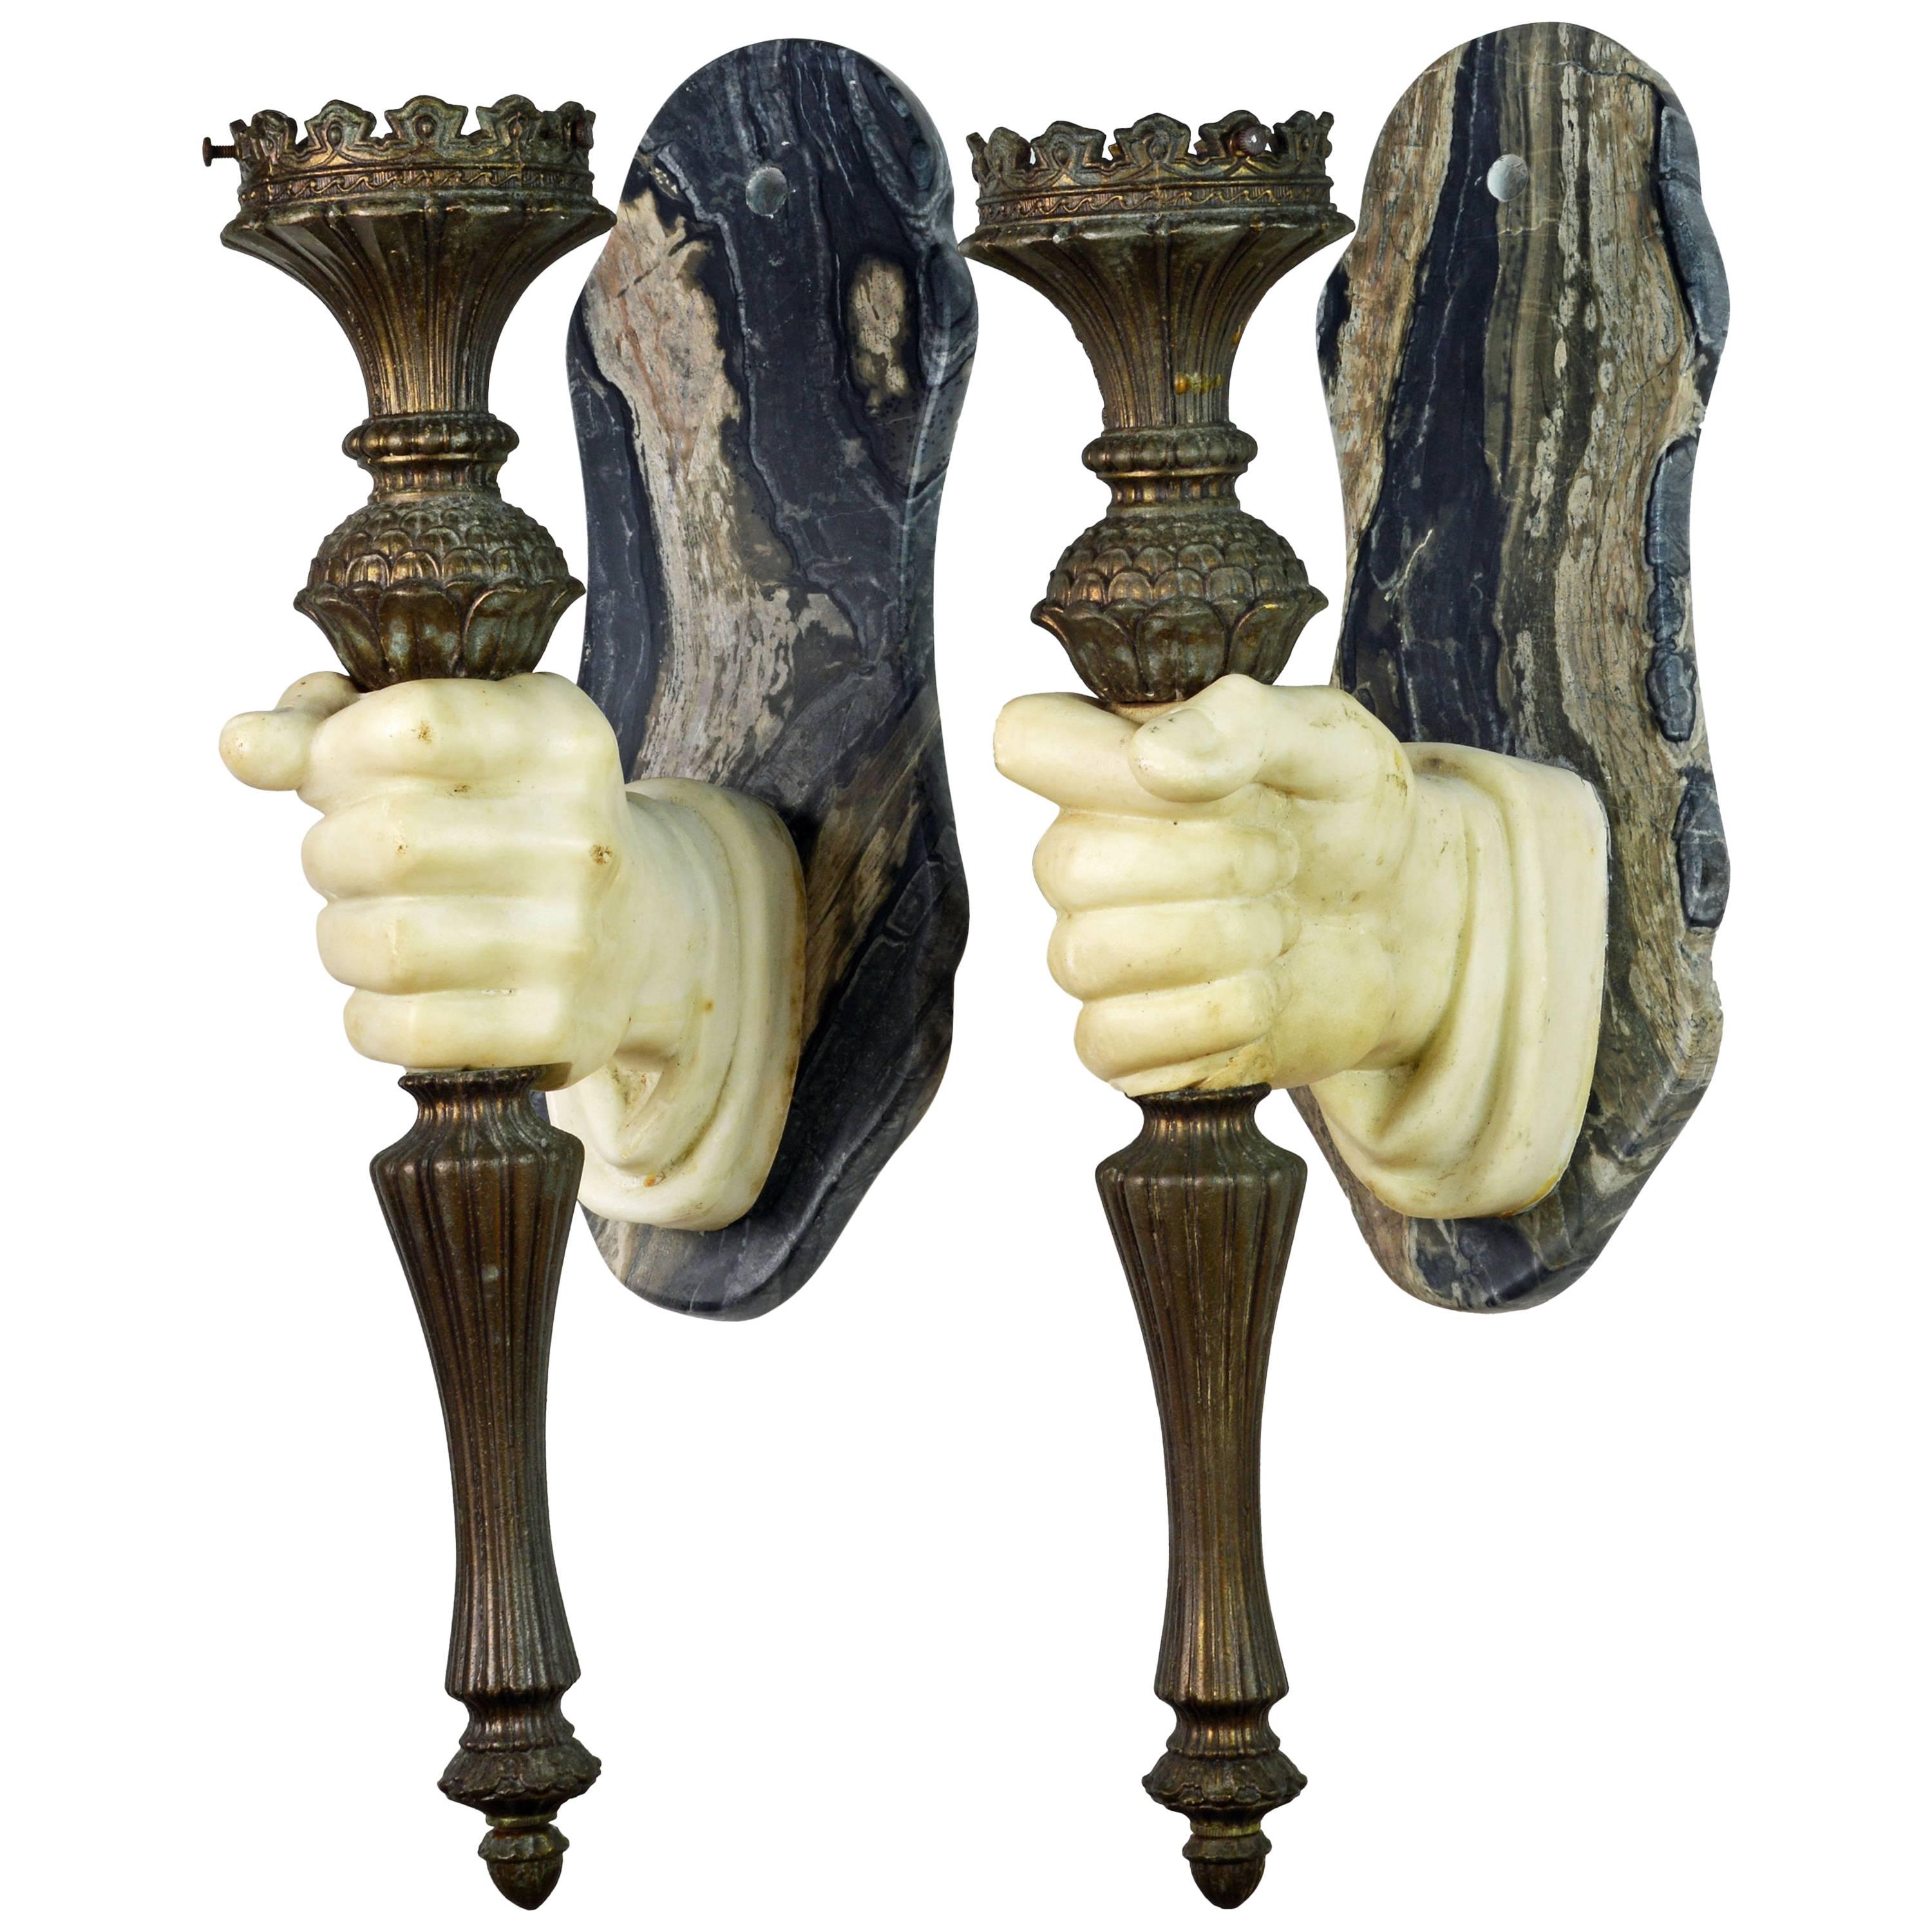 Pair of Rare 19th Ct. French Marble Hand and patinated metal Torch Wall Sconces